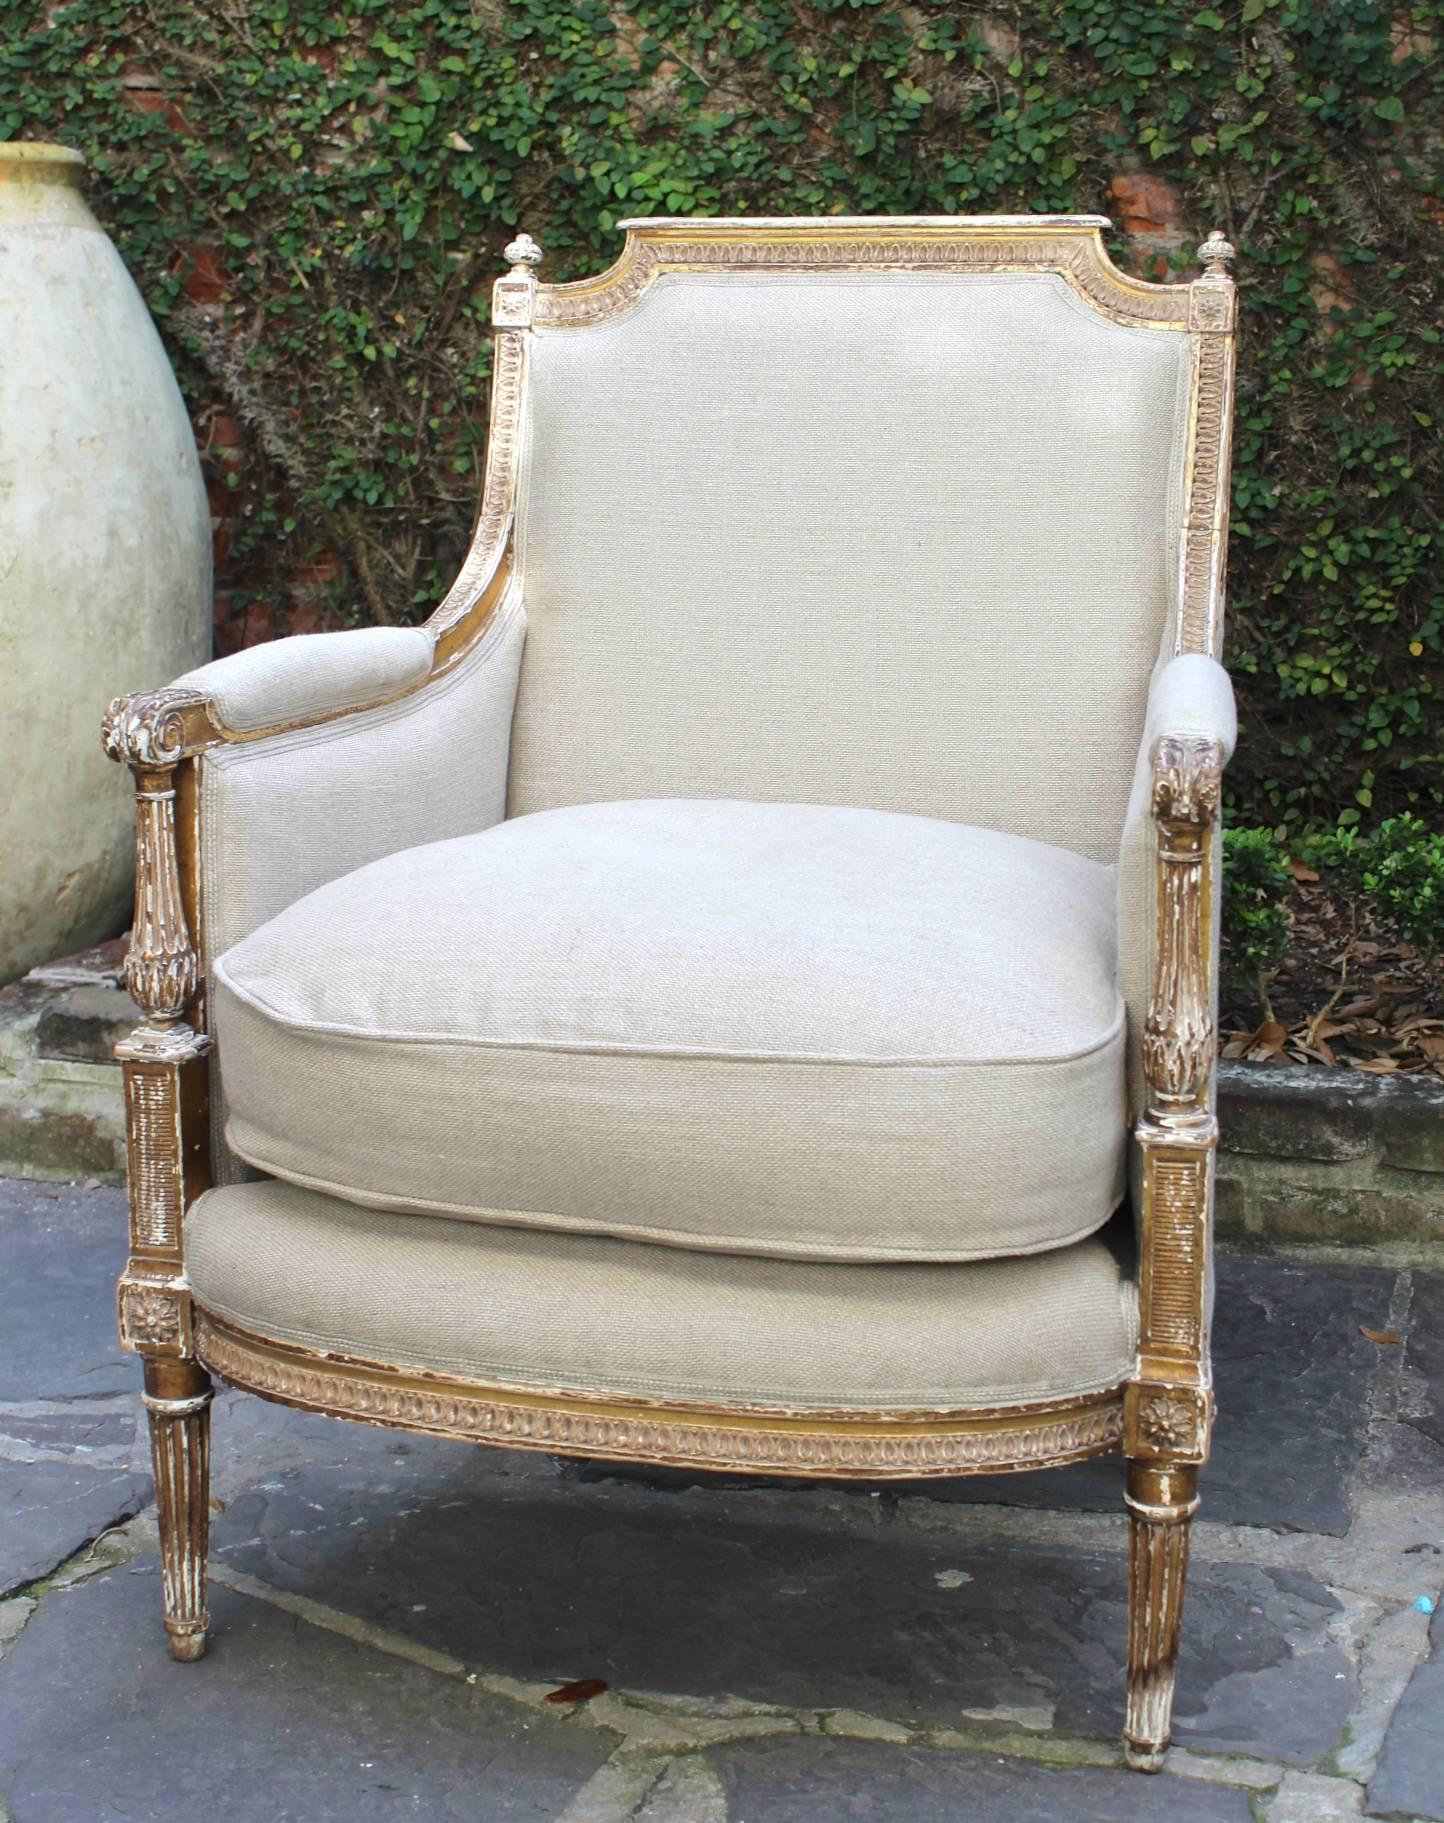 Pair of antique French late 18th-early 19th century gilded Louis XVI bergeres, completely taken down and reupholstered with French linen in Provence.